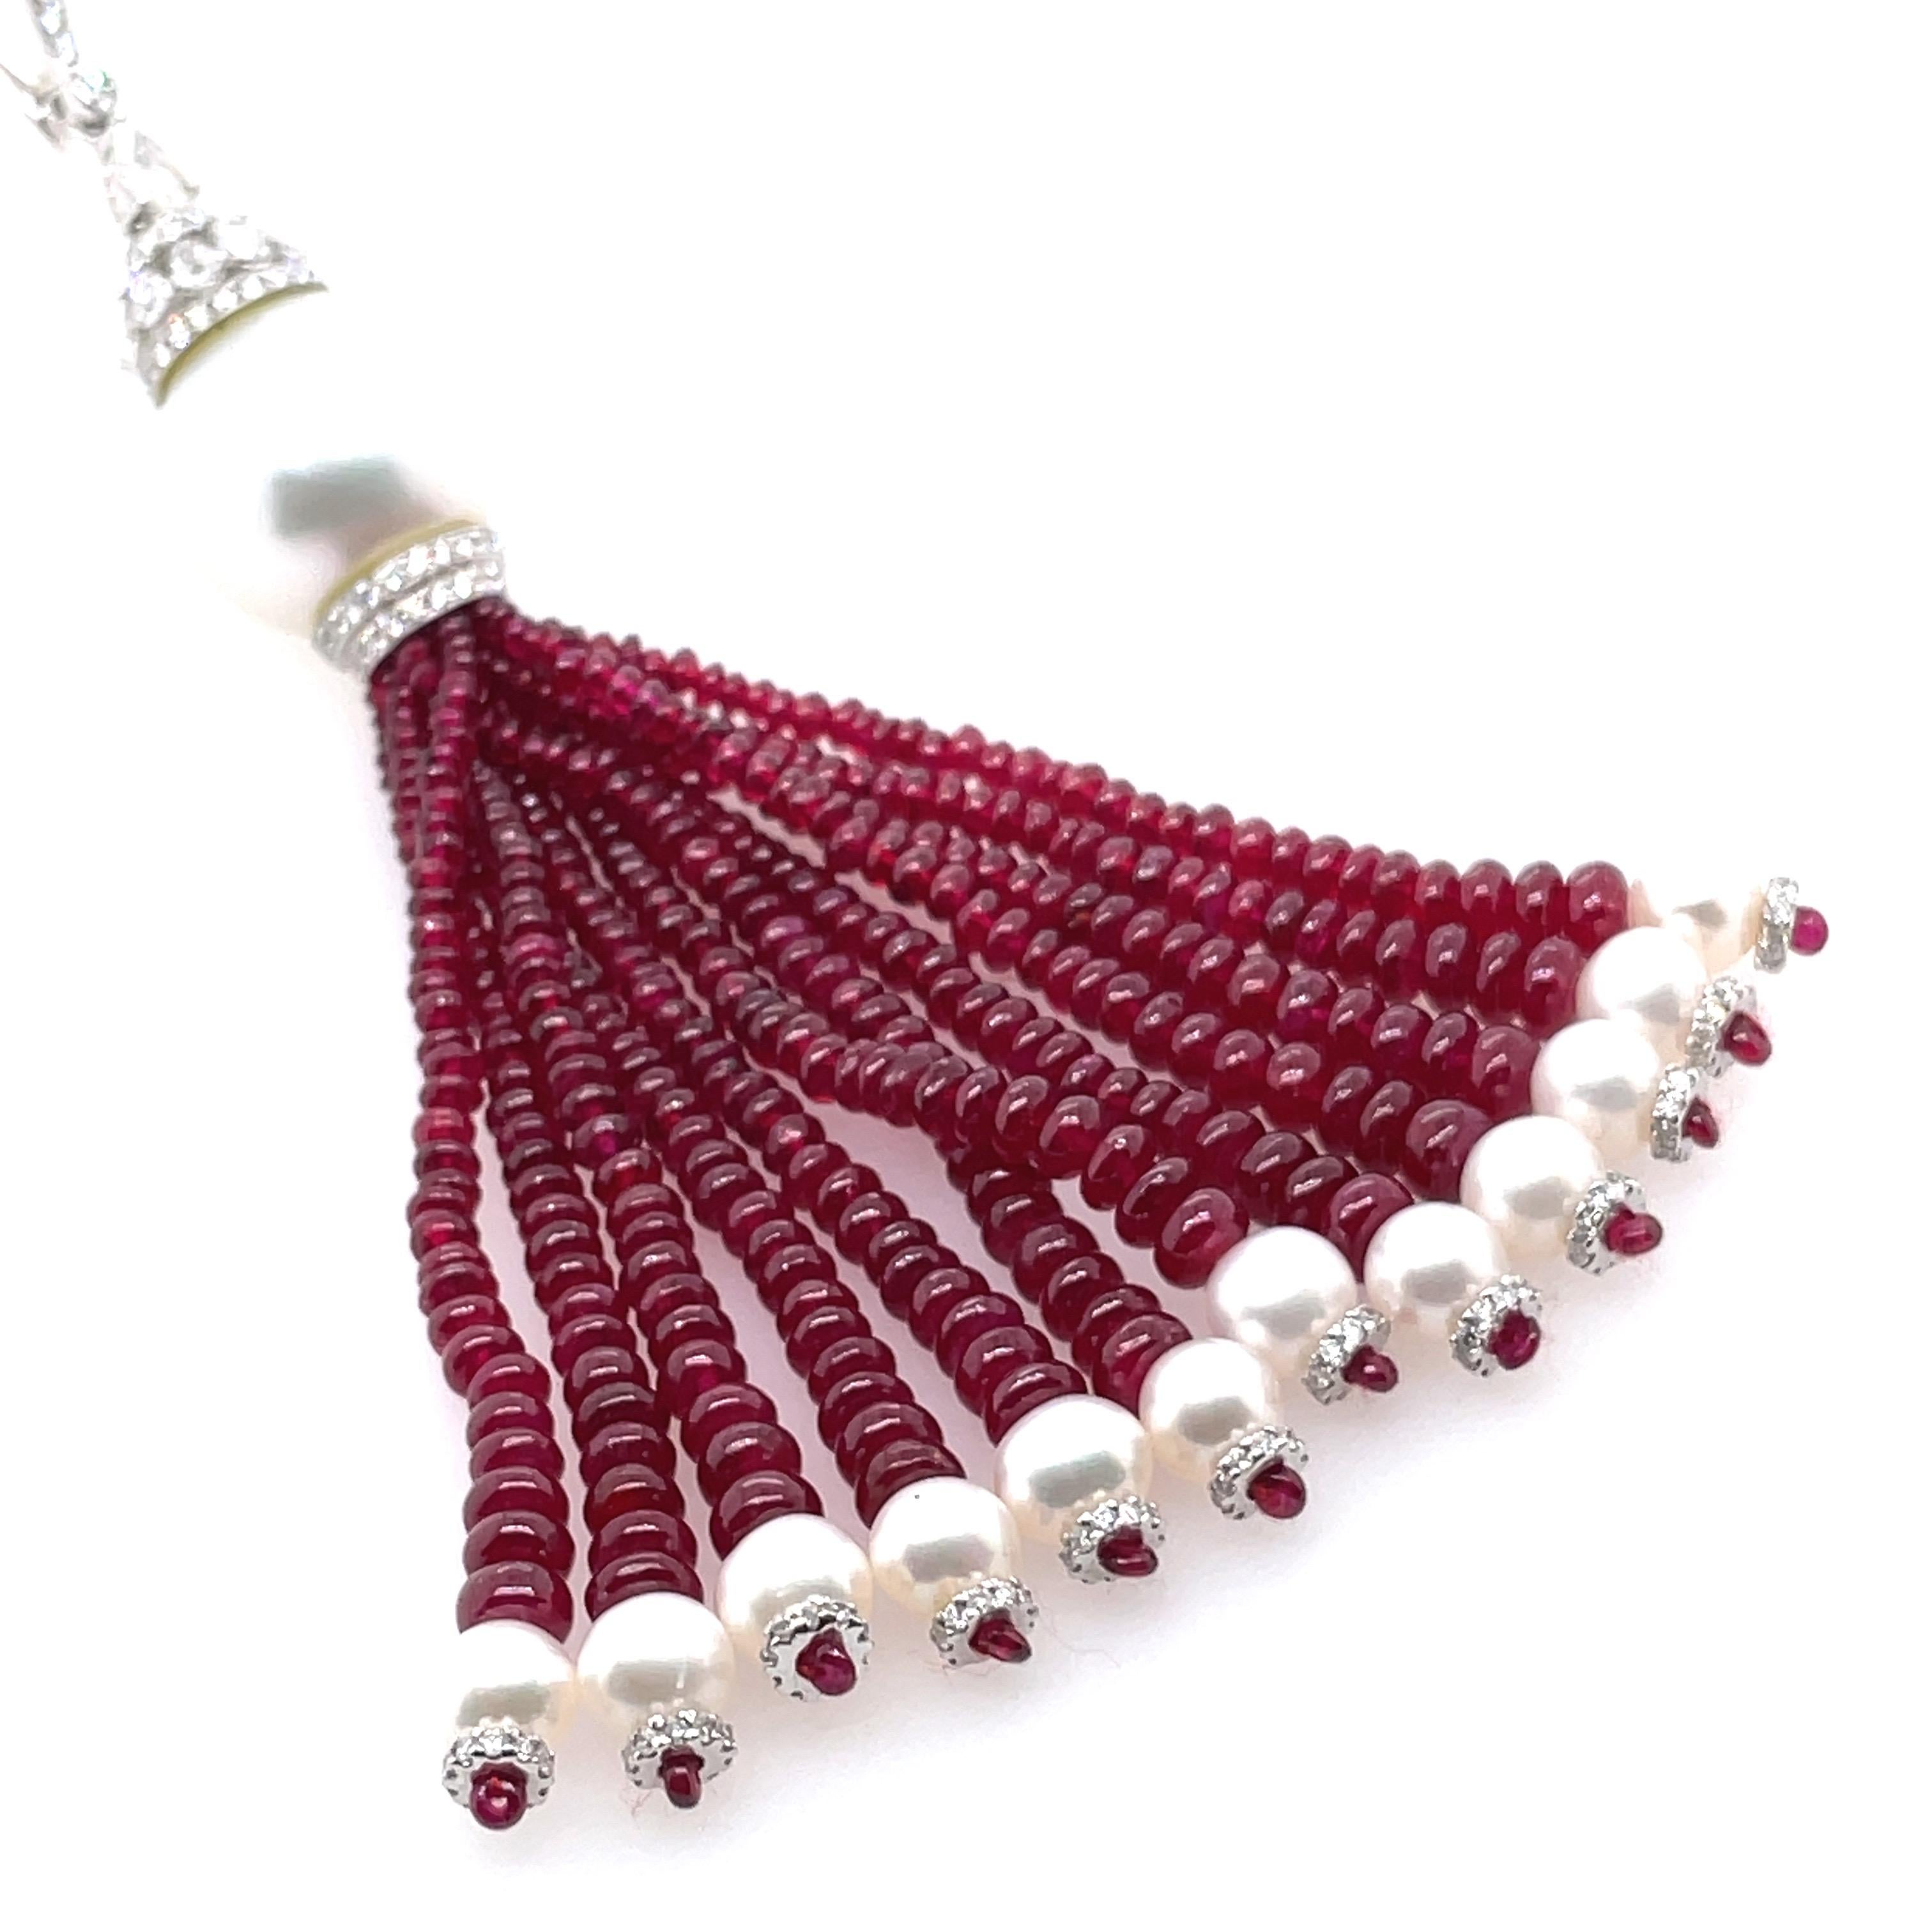 Featuring ruby beads totaling 62.10 carats and staggering pearls nestled at 8.55 carats, it exudes opulence at every turn. 

Rubies, scientifically known as corundum, are formed primarily of aluminum oxide and derive their vibrant red color from the